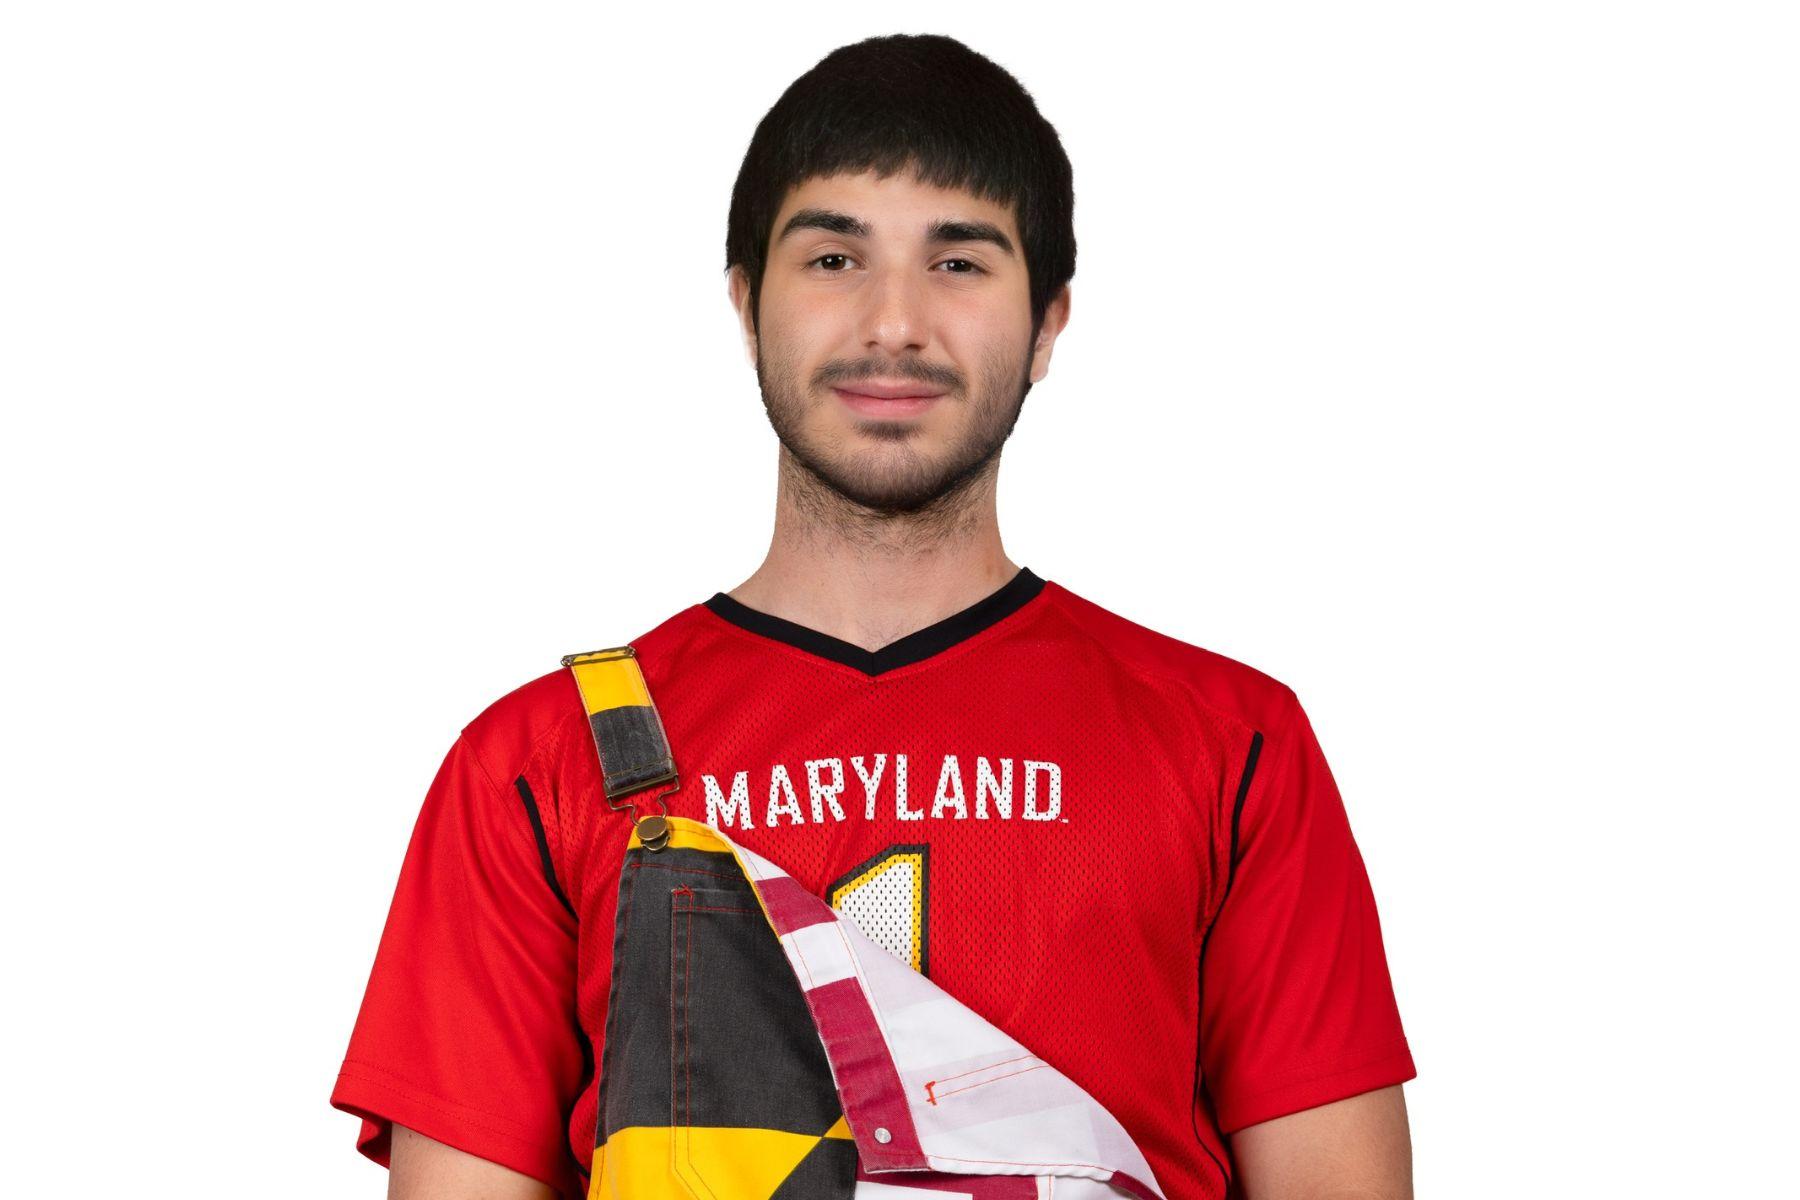 Emil is wearing a red Maryland jersey and is smiling at the camera